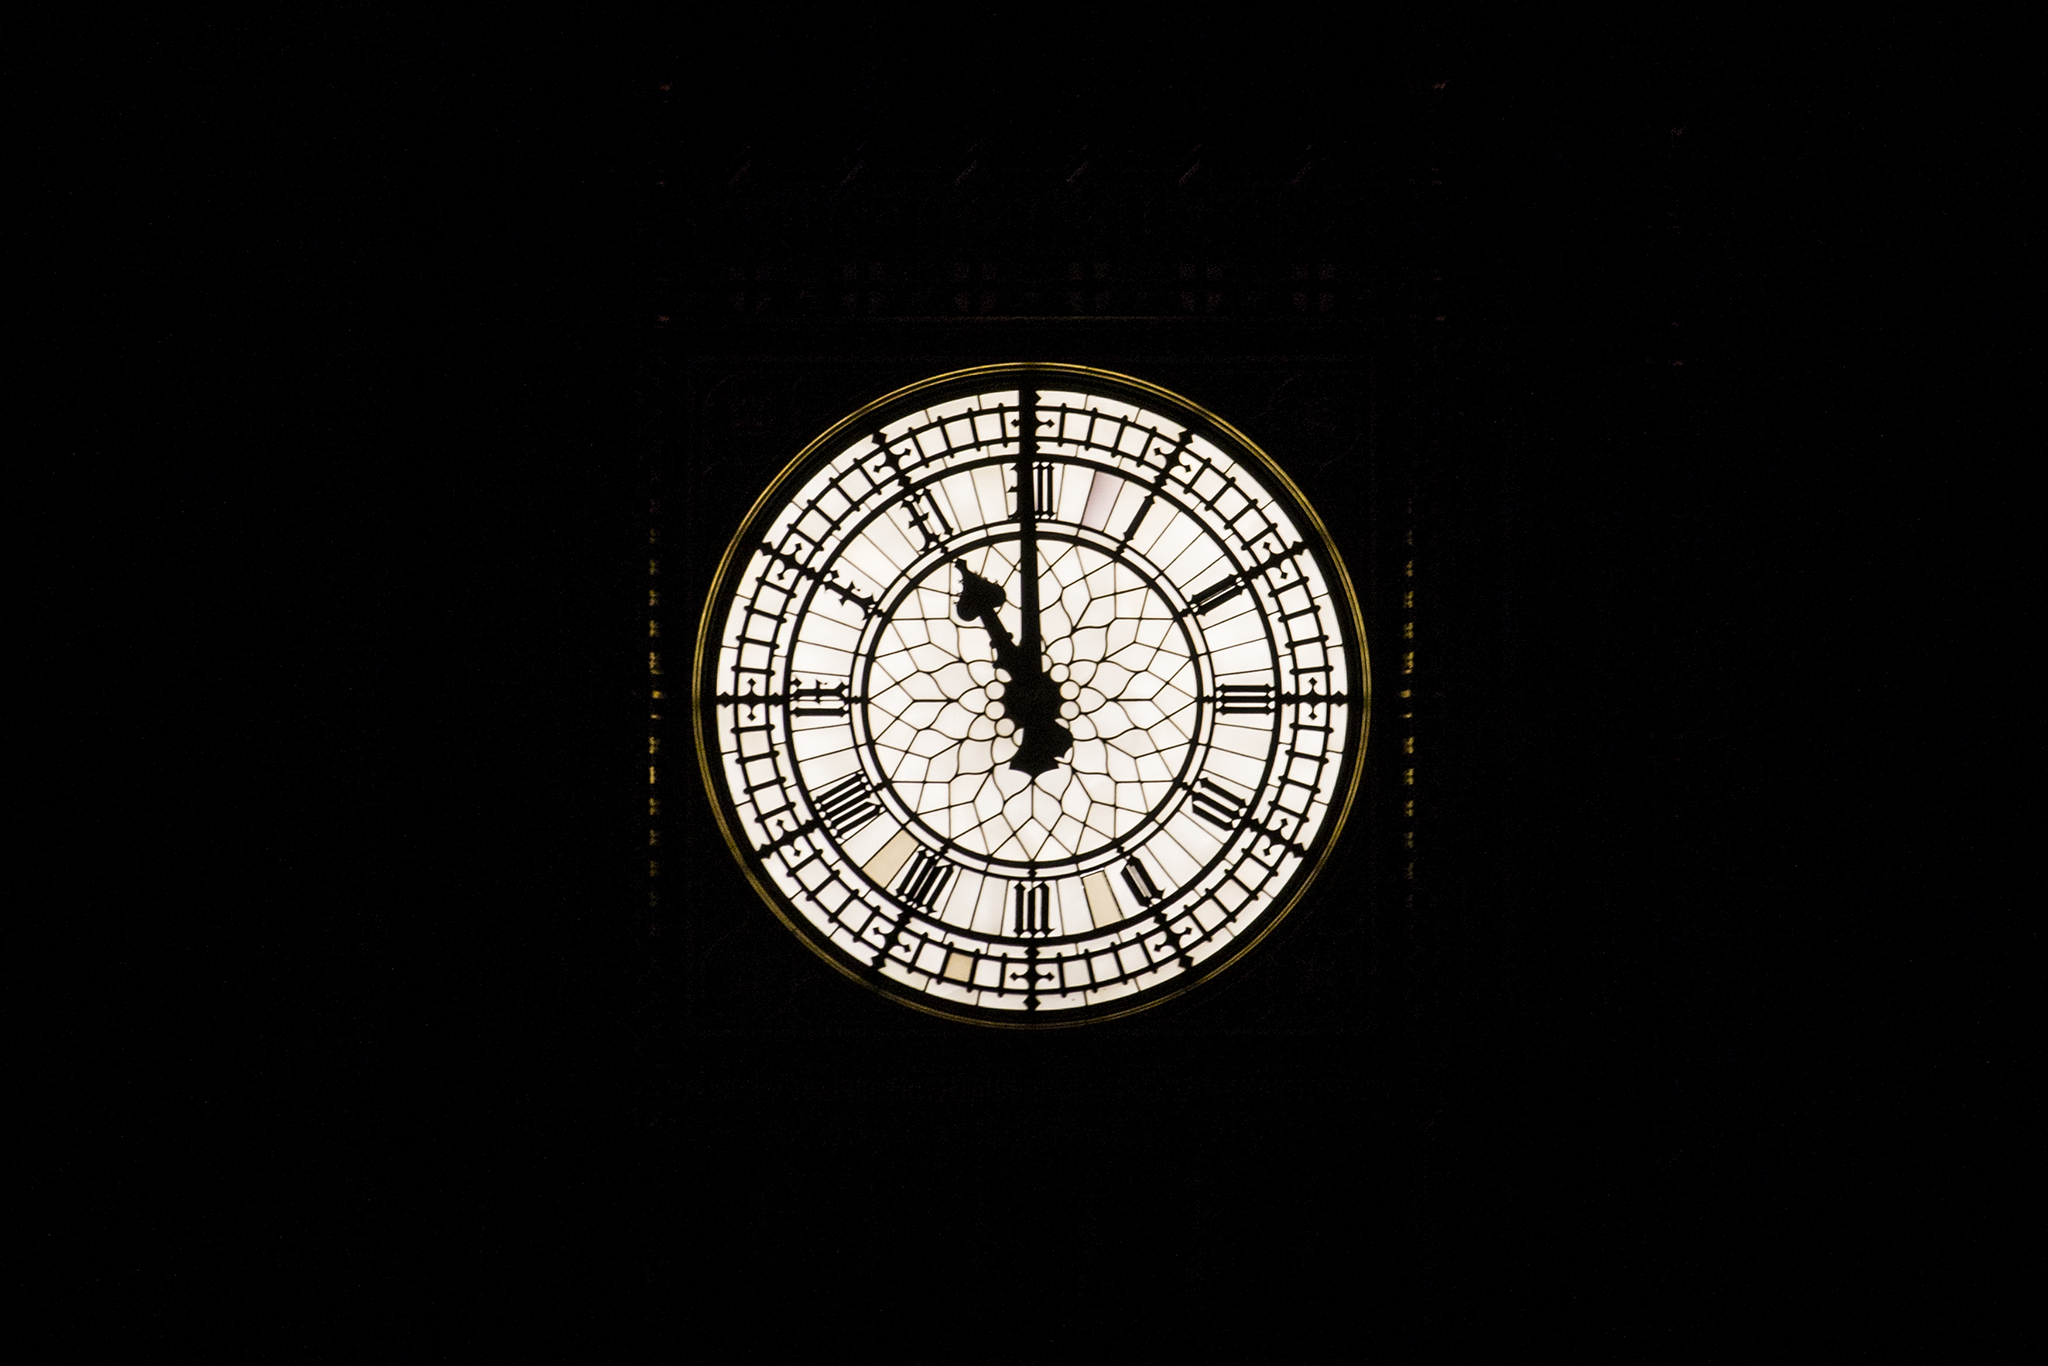 Big Ben strikes 11pm as the lights turn off on iconic buildings while London marks the centenary of the outbreak of World War I